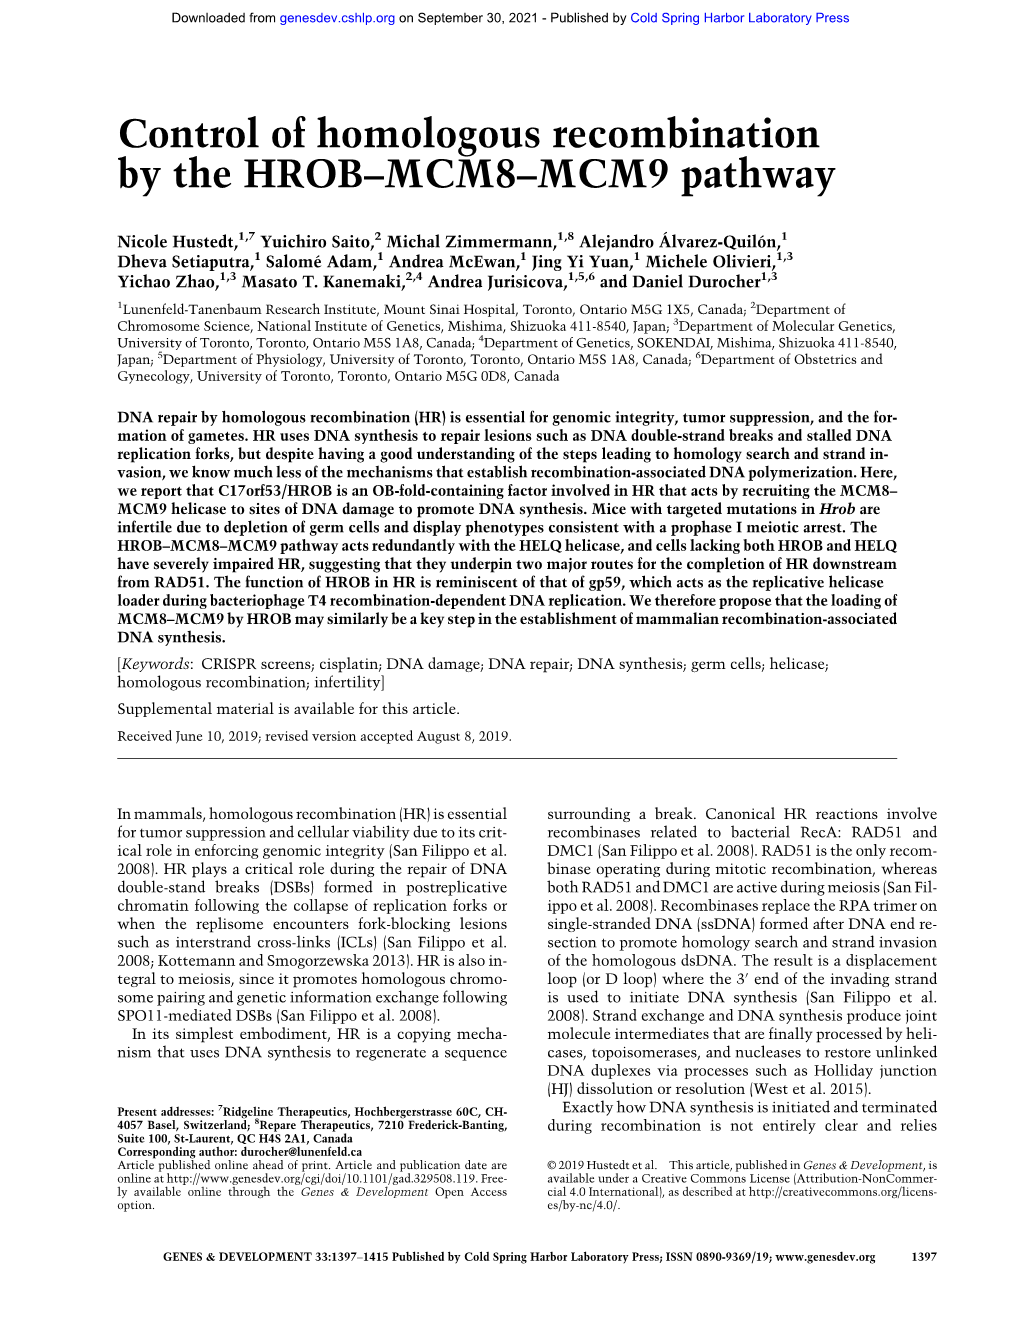 Control of Homologous Recombination by the HROB–MCM8–MCM9 Pathway